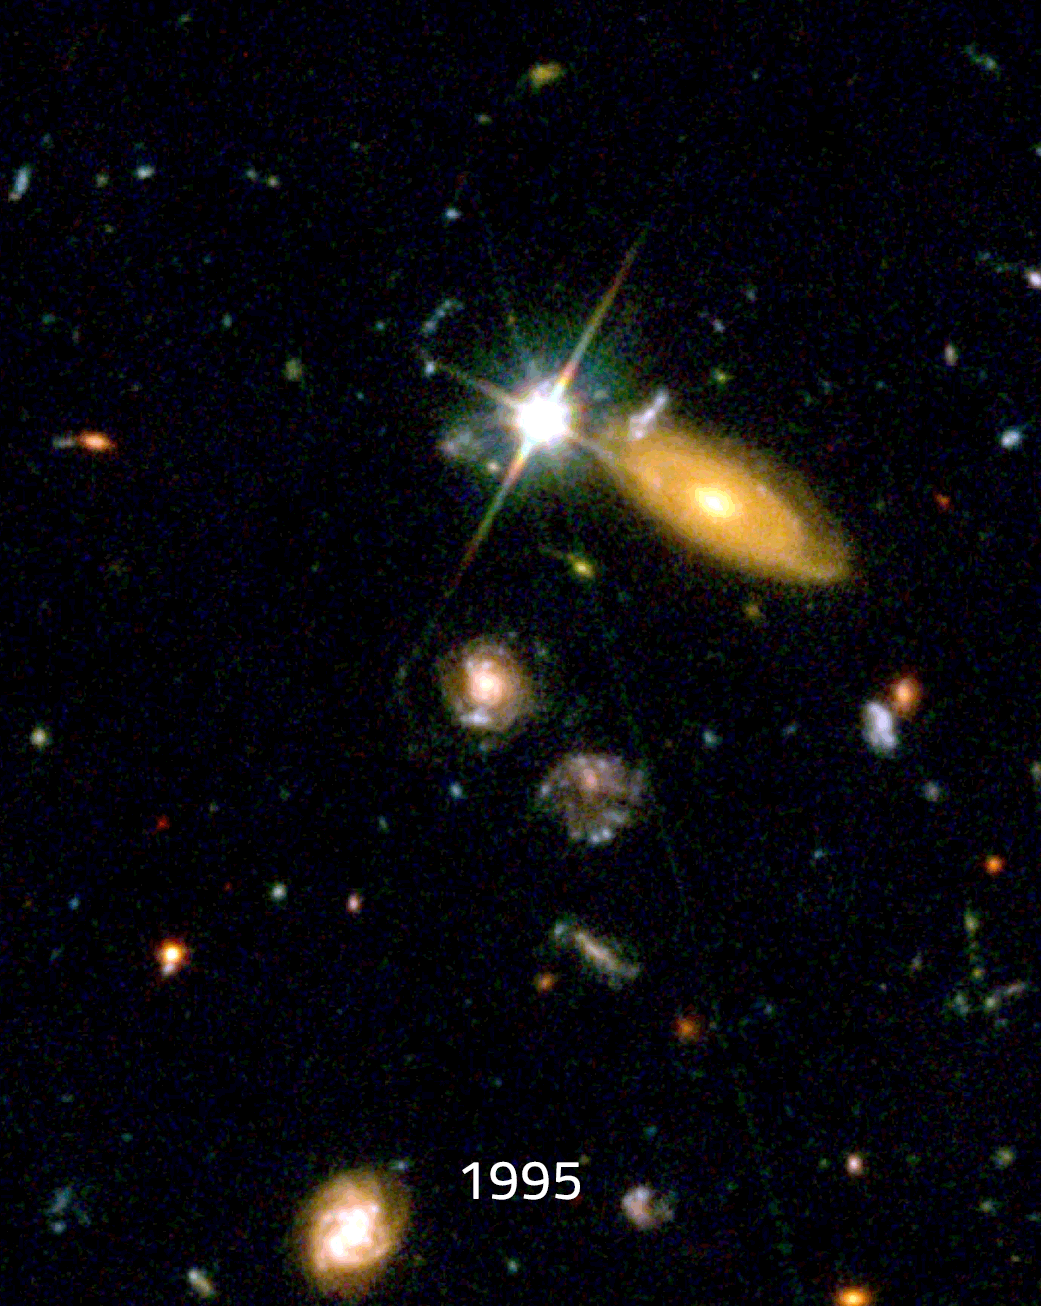 A portion of the Hubble Deep Field. Two observations of the same part of the sky. 1995 reels a bright star that is no longer there in the 2002 observation. This animated gif cycles between the two images making the supernova appear to blink on and off.